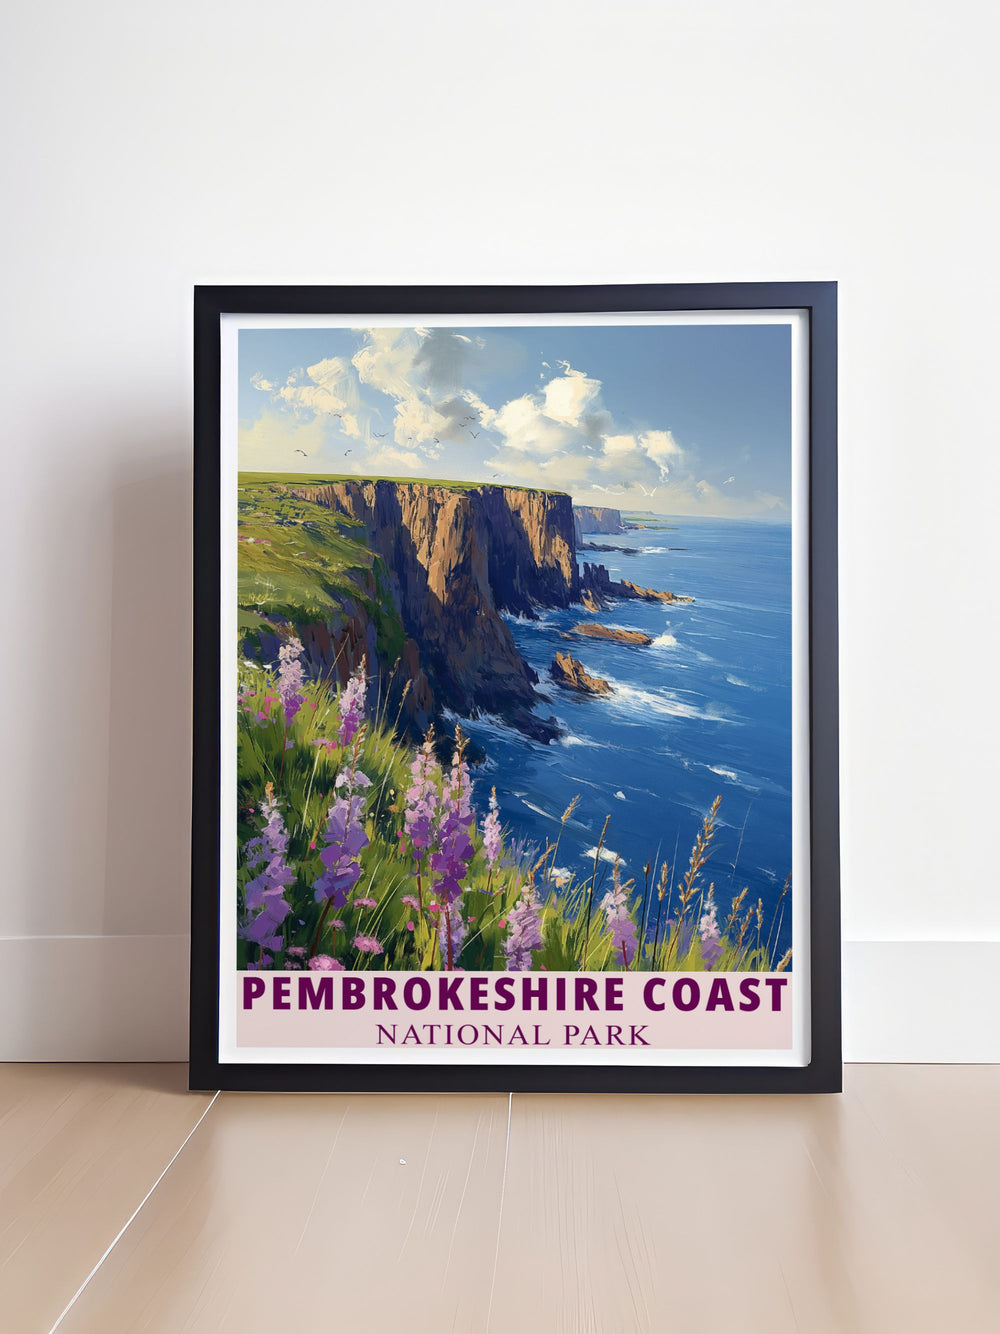 Our National Park Poster collection features Pembrokeshire Coast, highlighting its rugged cliffs and picturesque beaches. These posters are designed for nature lovers and art enthusiasts, offering a beautiful representation of one of the UKs most stunning coastal areas.